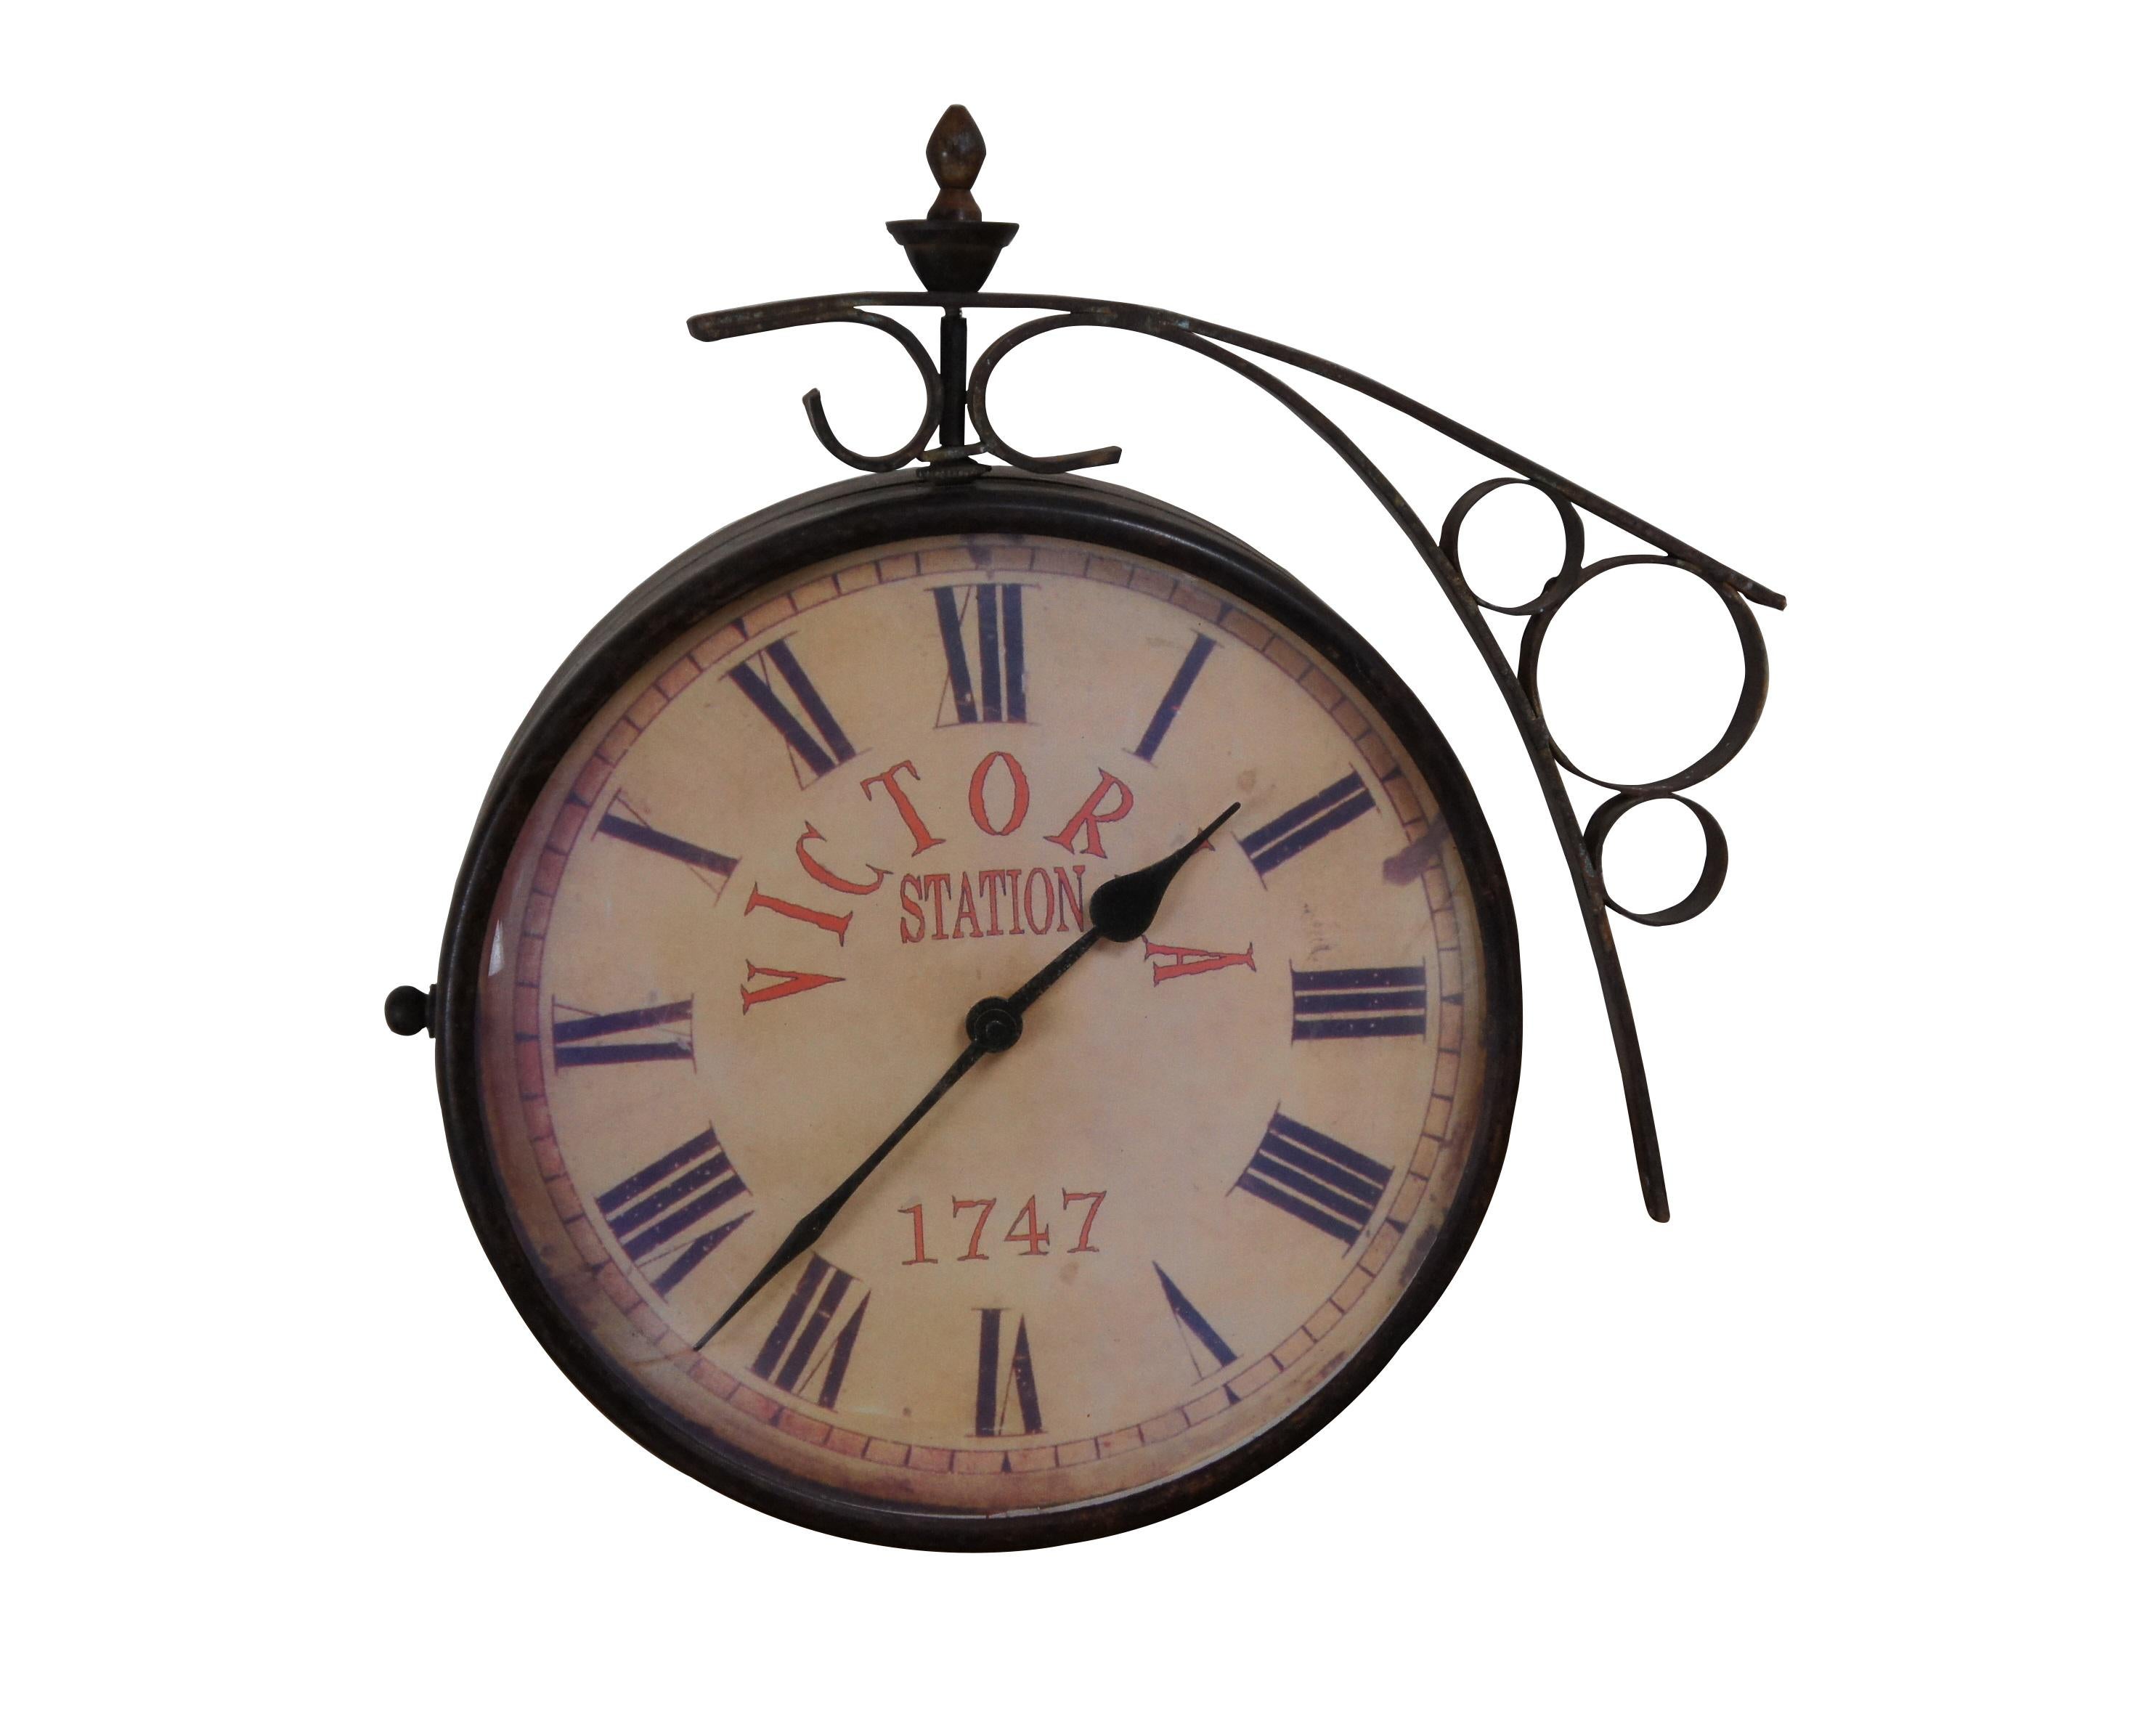 Late 20th century double sided railway clock styled after the famous clock at Victoria Station, London. Wrought metal wall mounted support and case in a dark bronze finish. 10 inch diameter printed face with faux distressing, Roman numerals, and the